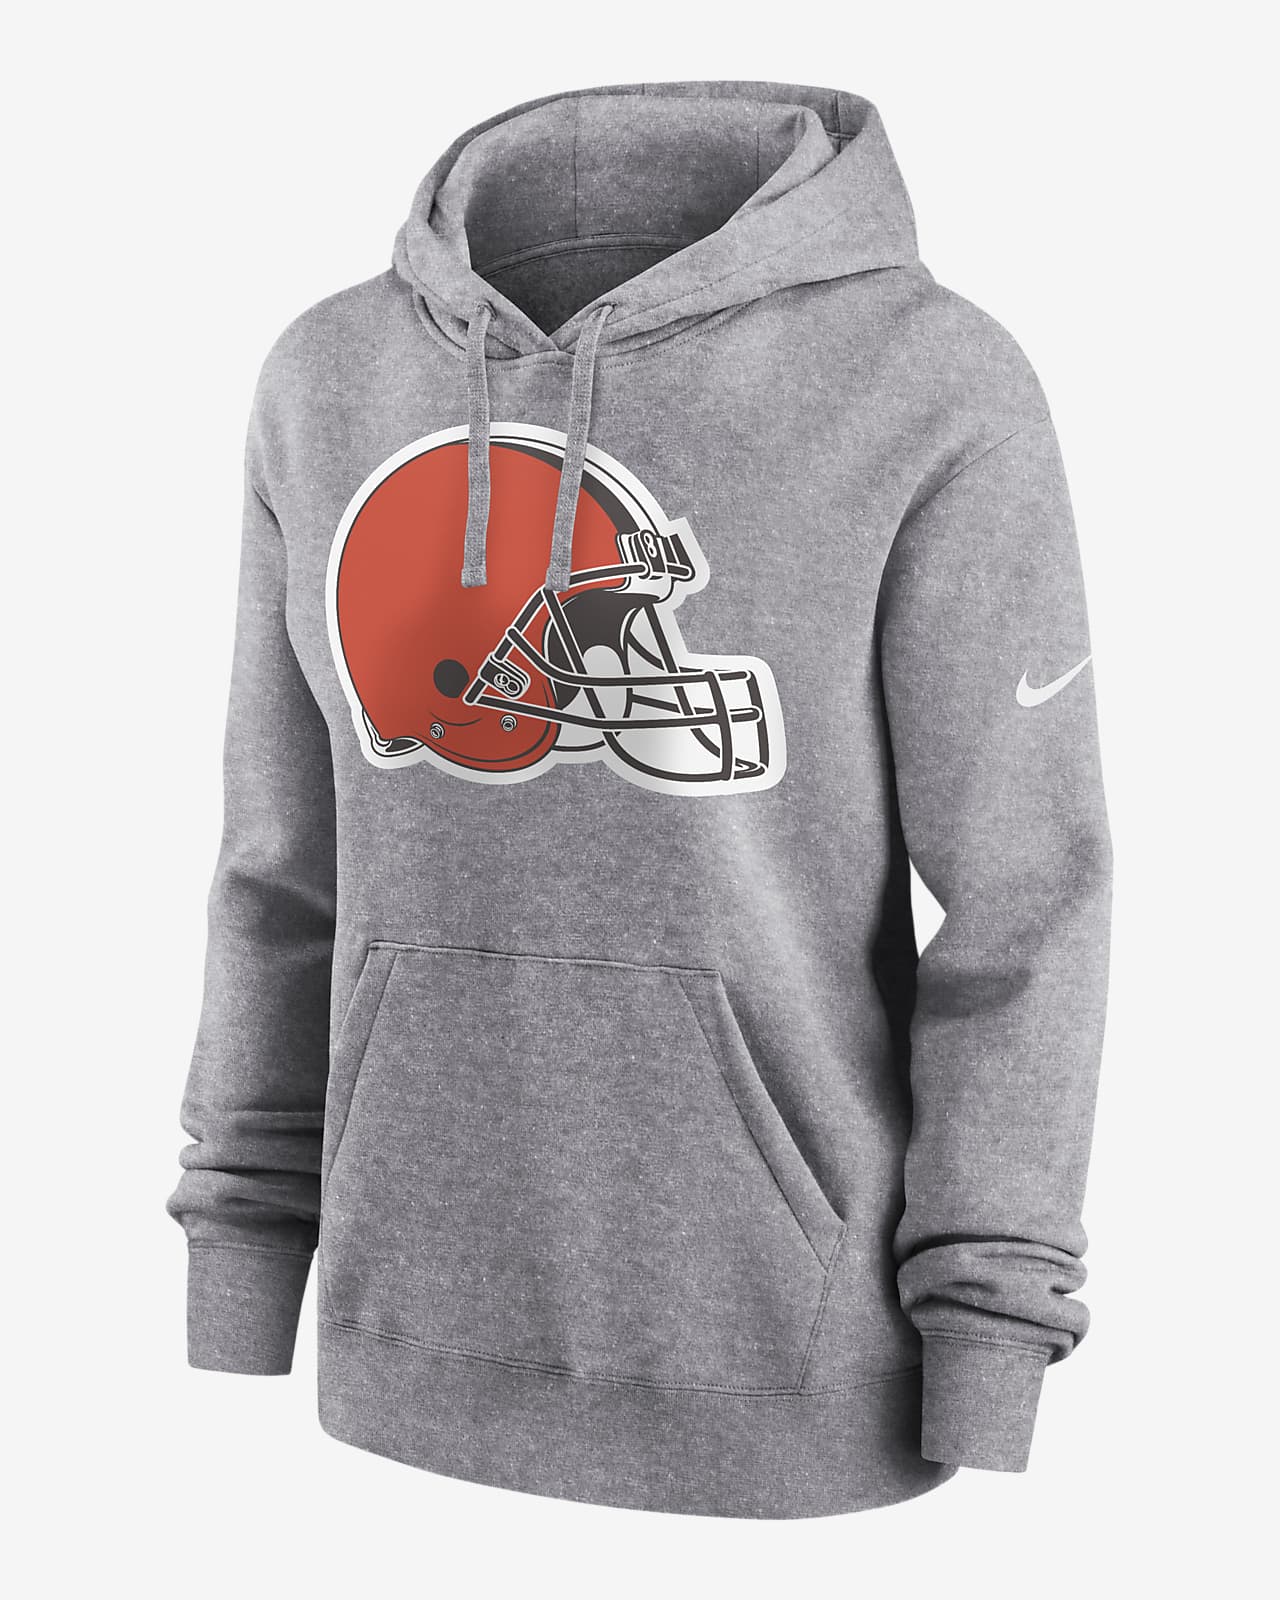 Nike Logo Club (NFL Cleveland Browns) Women's Pullover Hoodie.